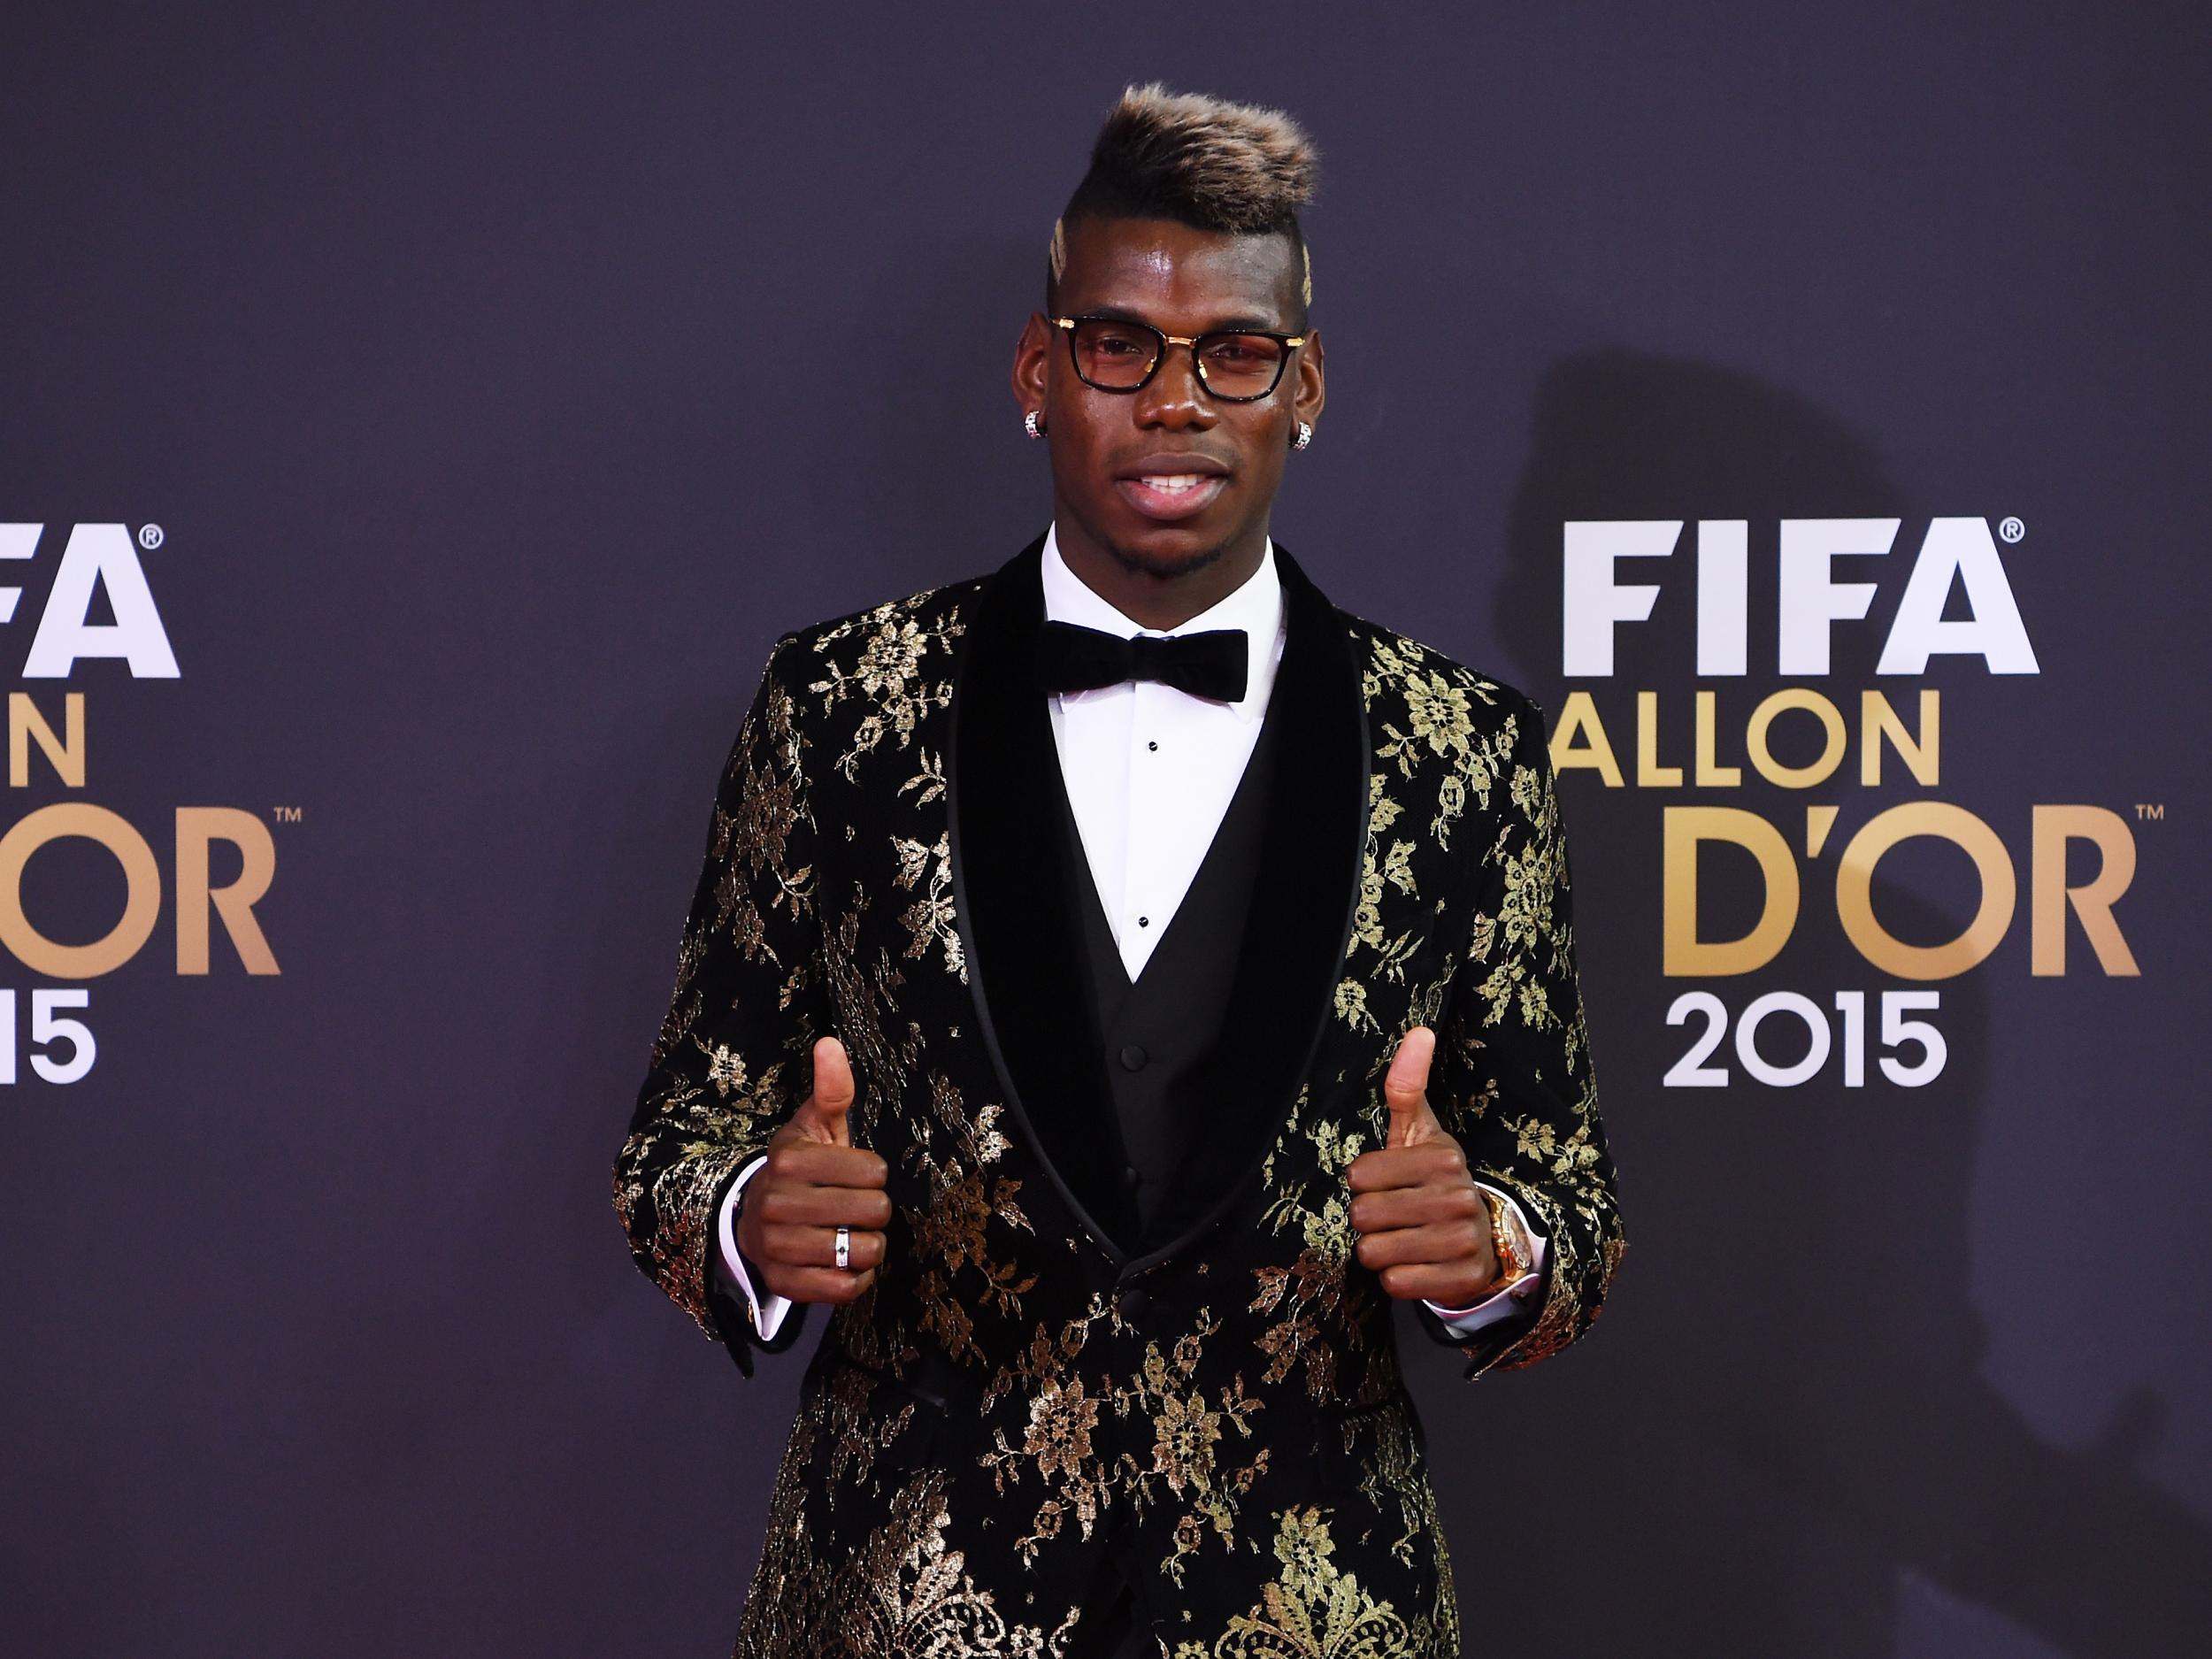 Pogba was named in the 2015 Fifa team of the Year